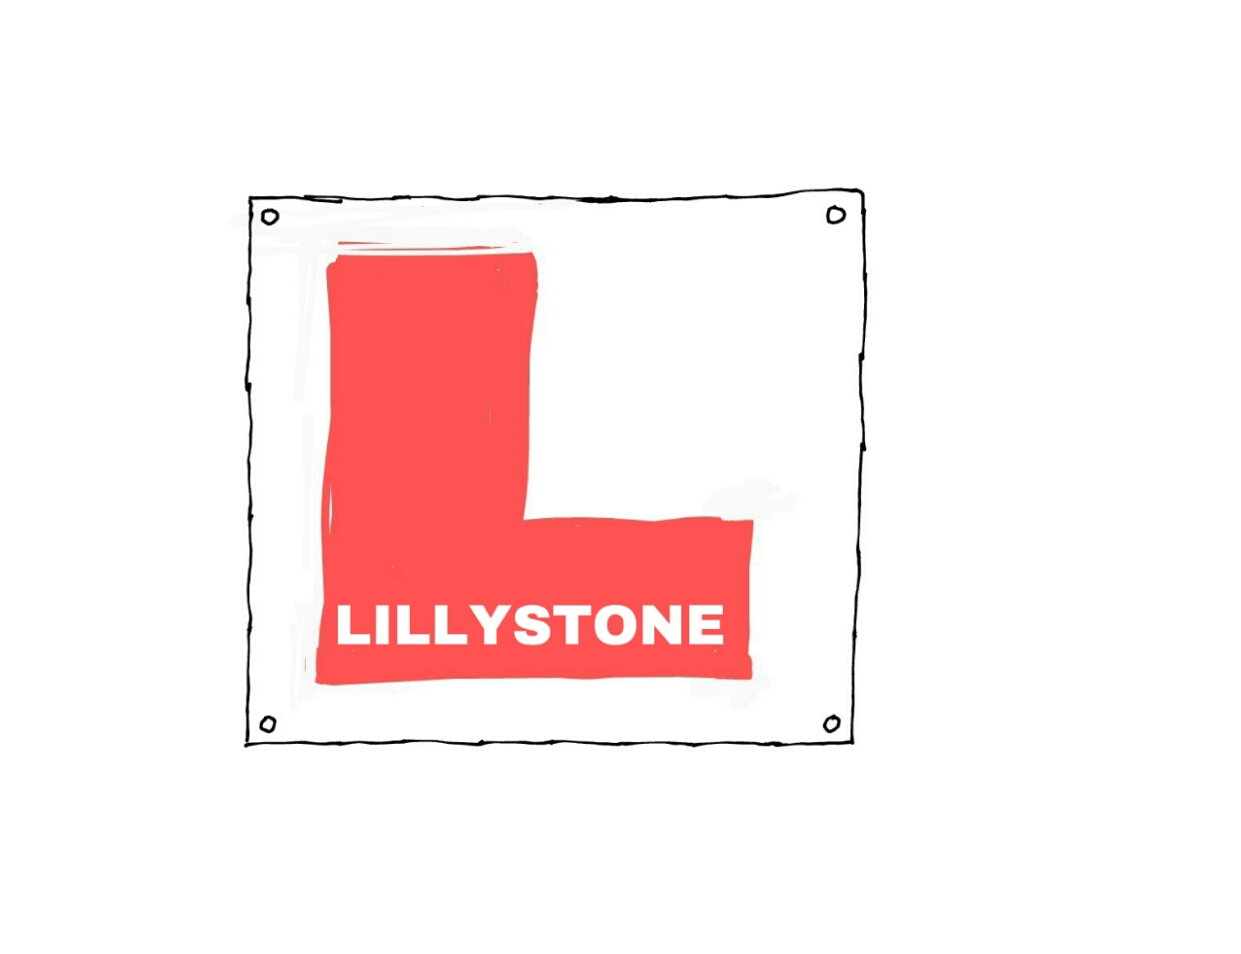 LILLYSTONE HQ - something we can call ours ™ - Neil Lillystone - swcco - carpets | interiors | artwork | etc - CIAO - carpets interiors artwork objects - srf247 - Neil Ciao - Neil Lillystone - swcco